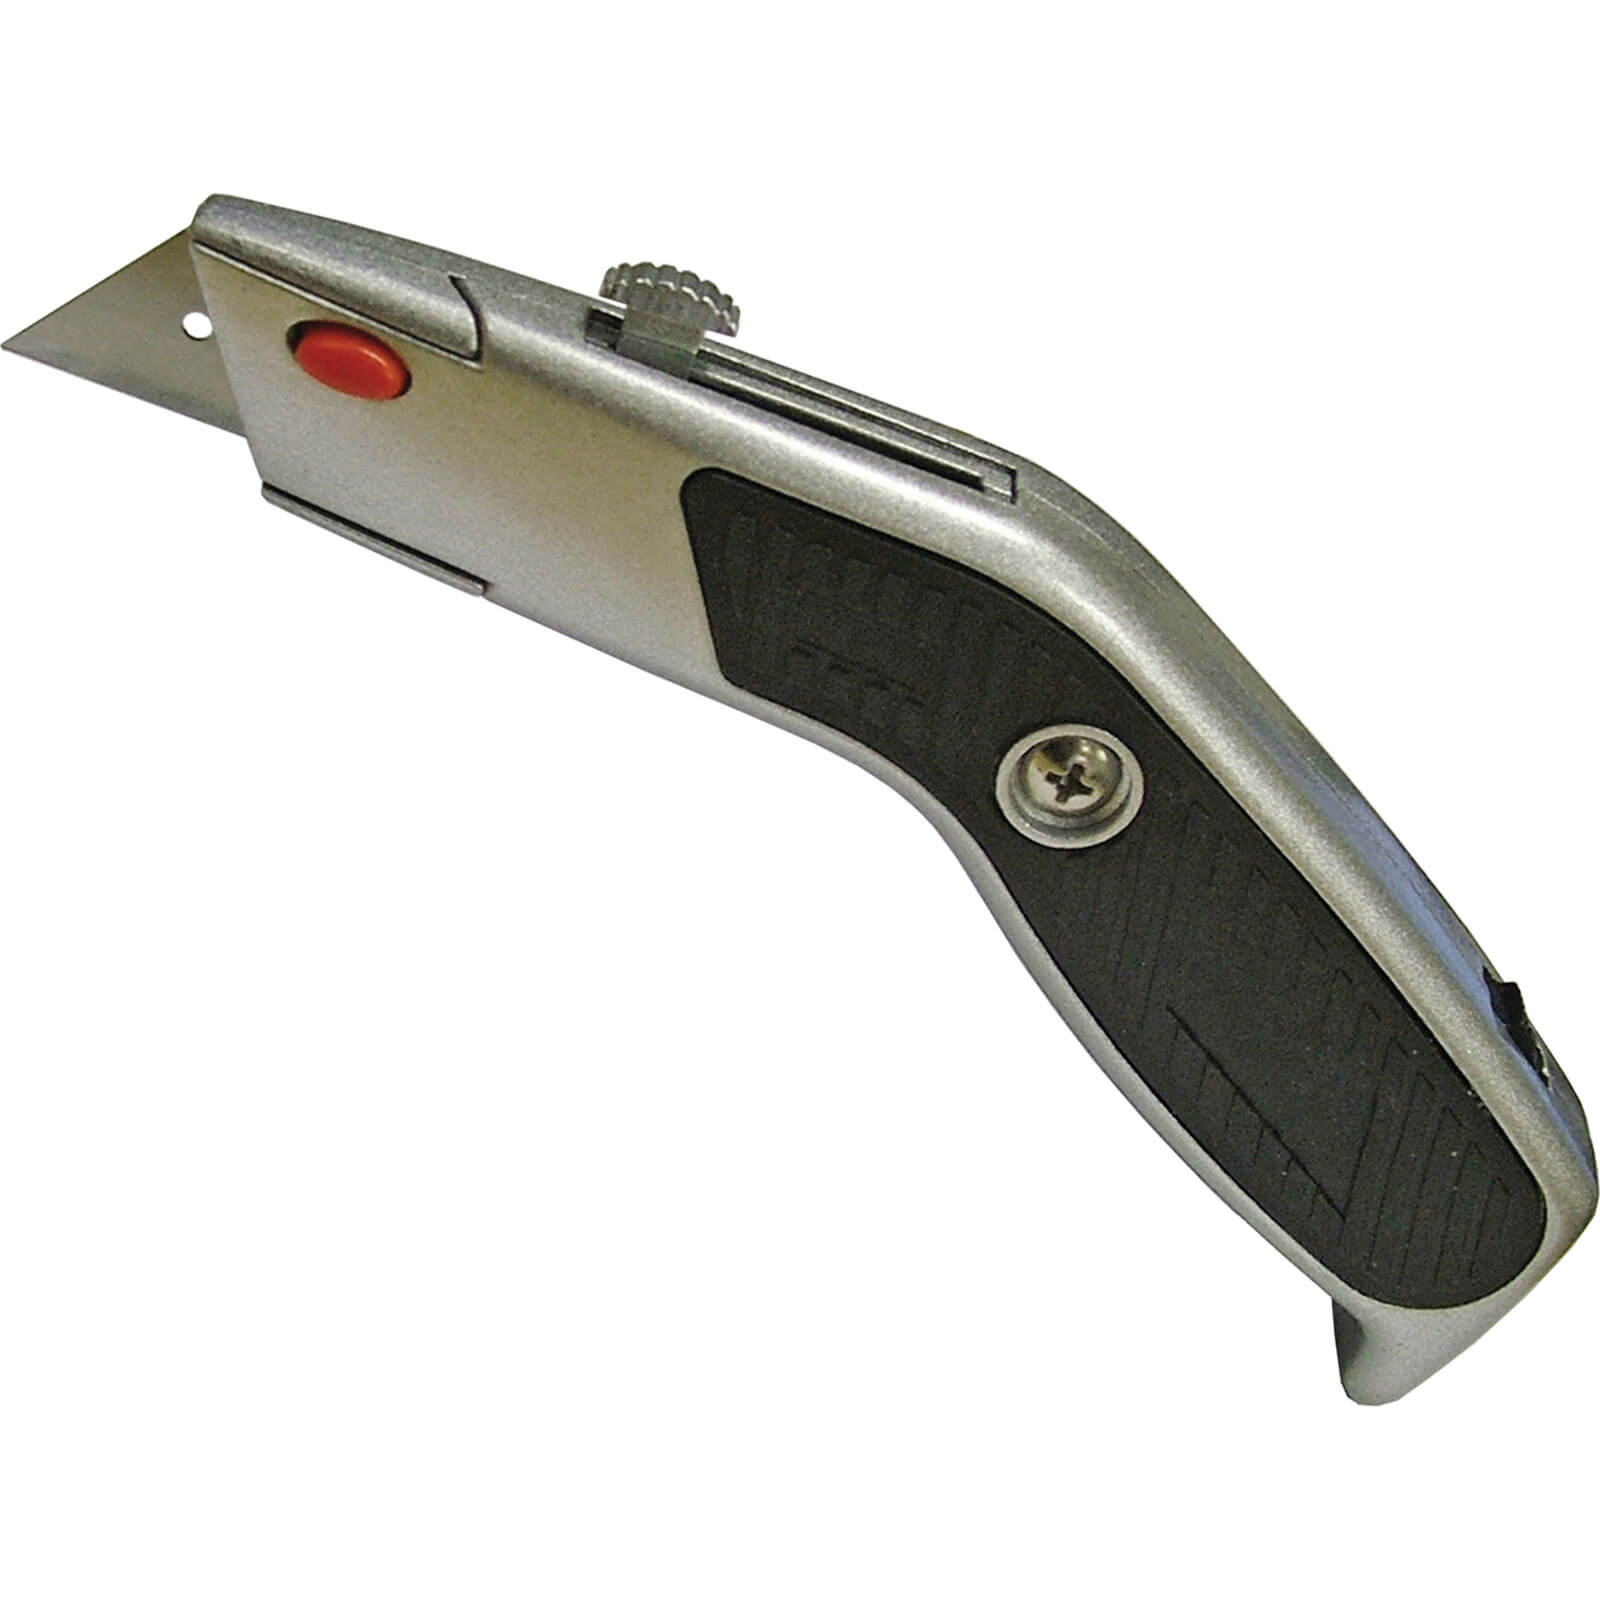 Image of Faithfull Angled Head Trimming Knife Retractable Blade + 5 Blades